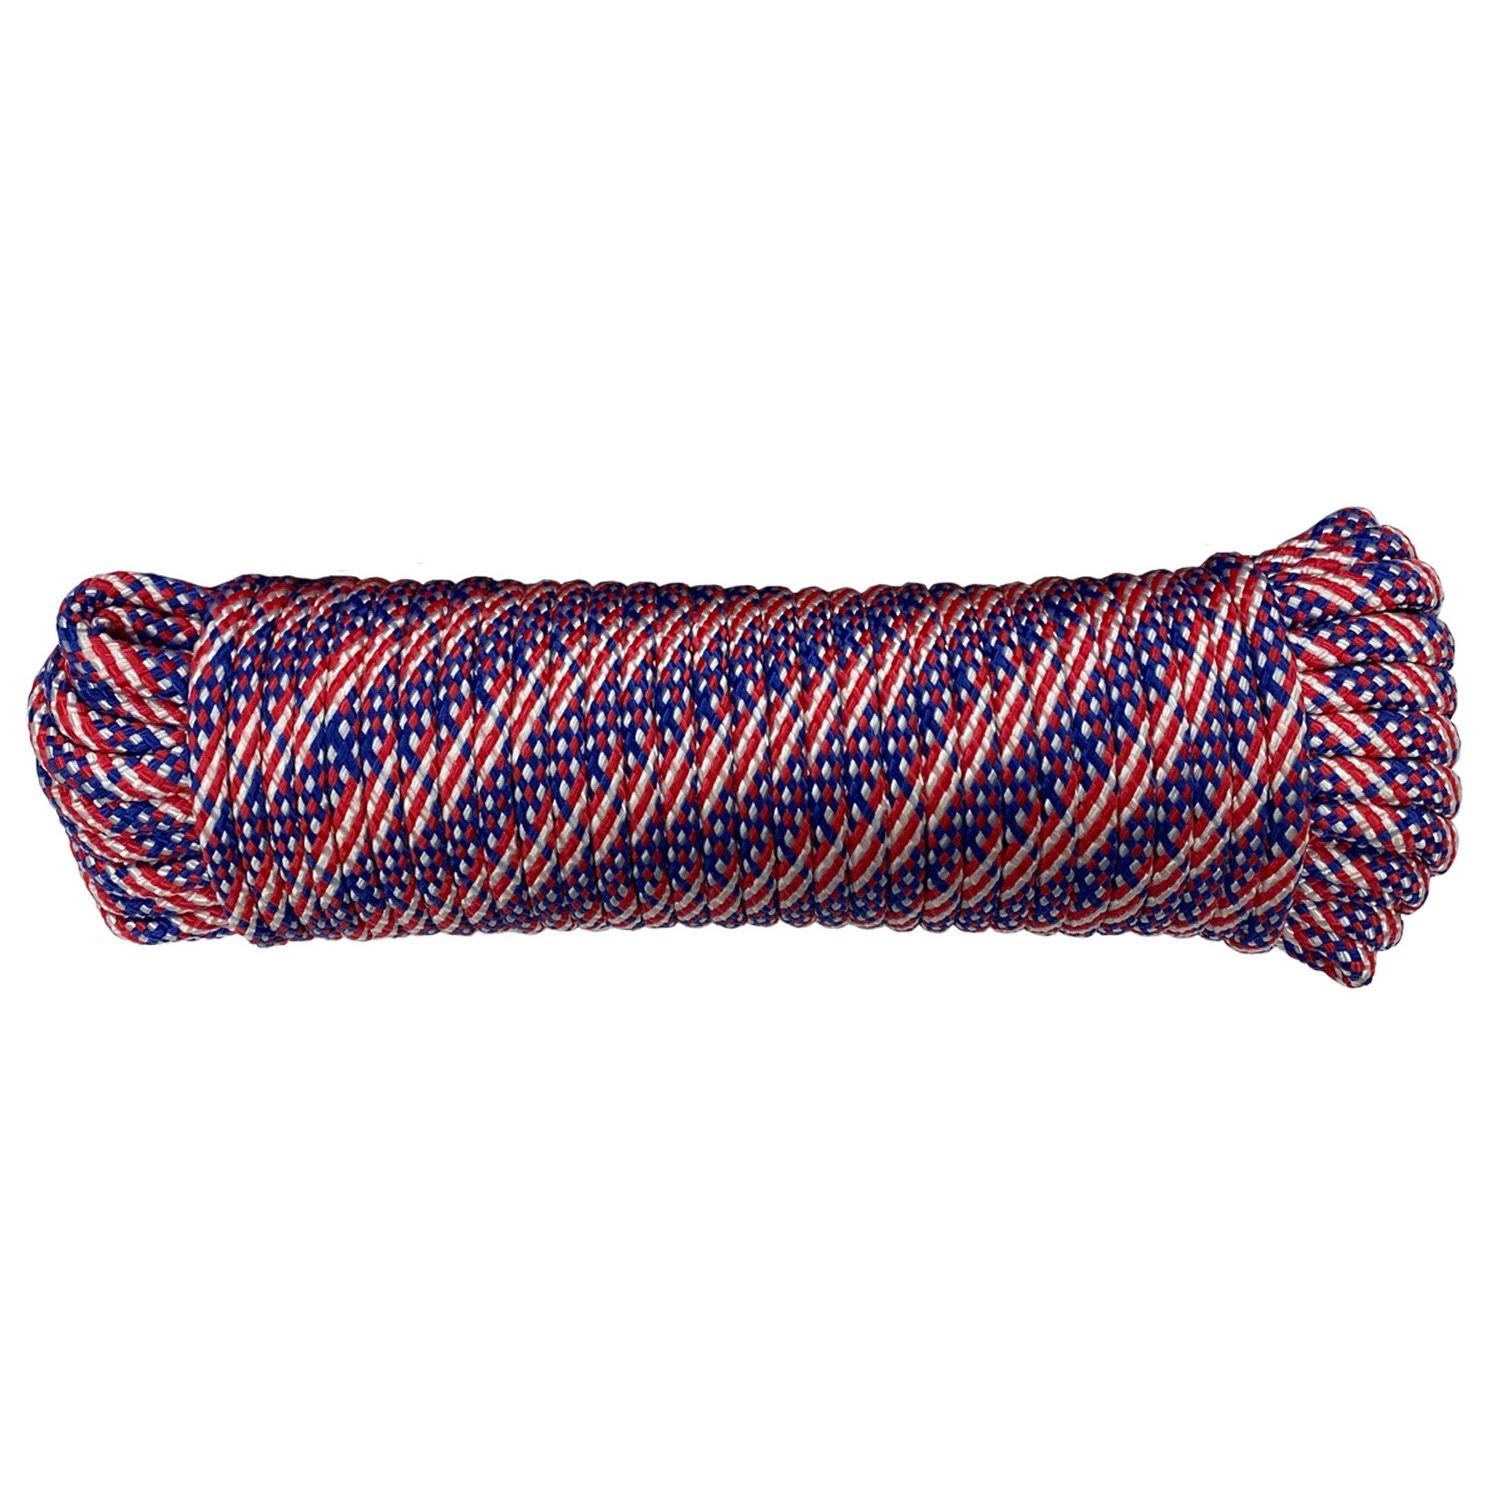 Diamond Braid Poly Rope 3/8 In x 100 Ft 244 lbs Limit - Blue, Red